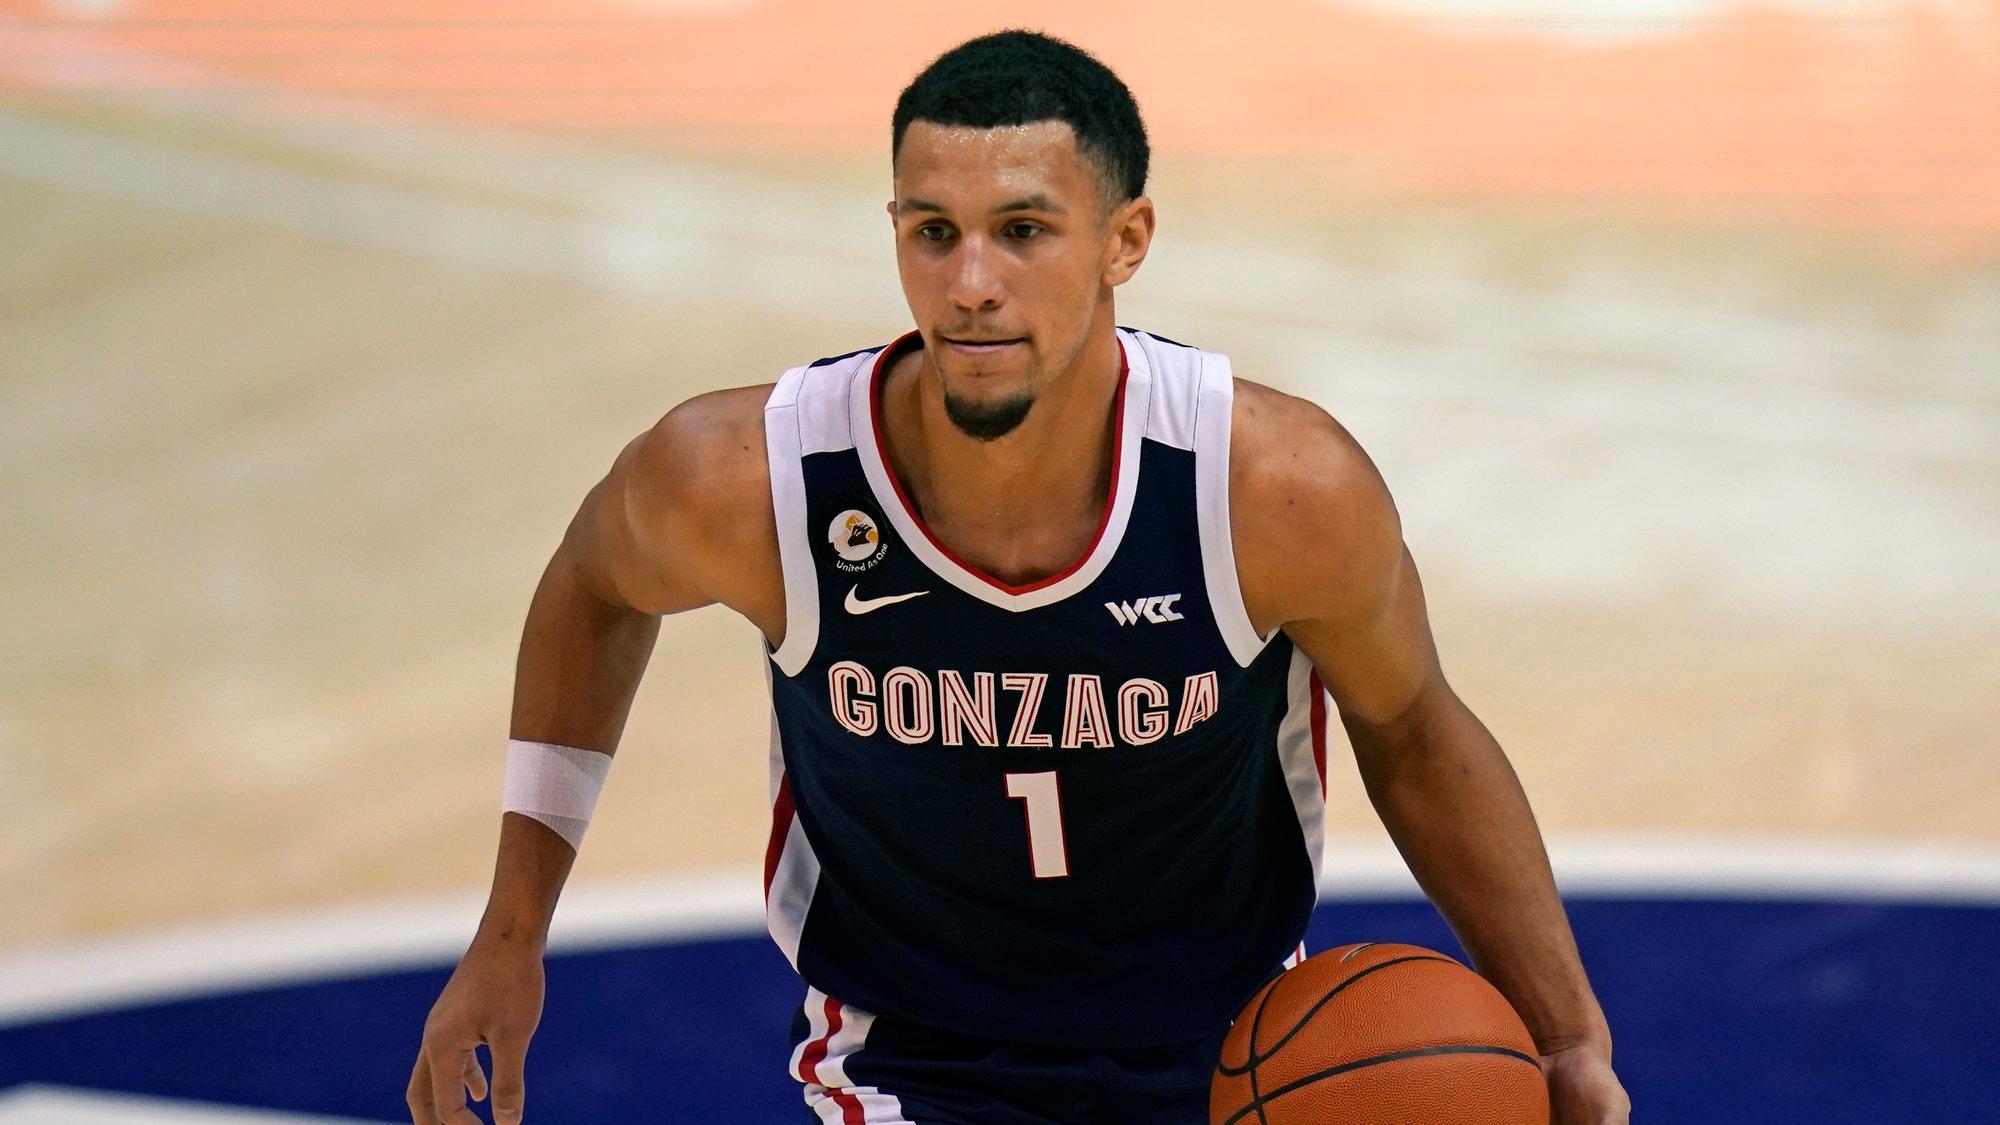 Gonzaga guard Jalen Suggs (1) brings the ball up court in the second half during an NCAA college basketball game against BYU Monday, Feb. 8, 2021, in Provo, Utah. (AP Photo/Rick Bowmer)